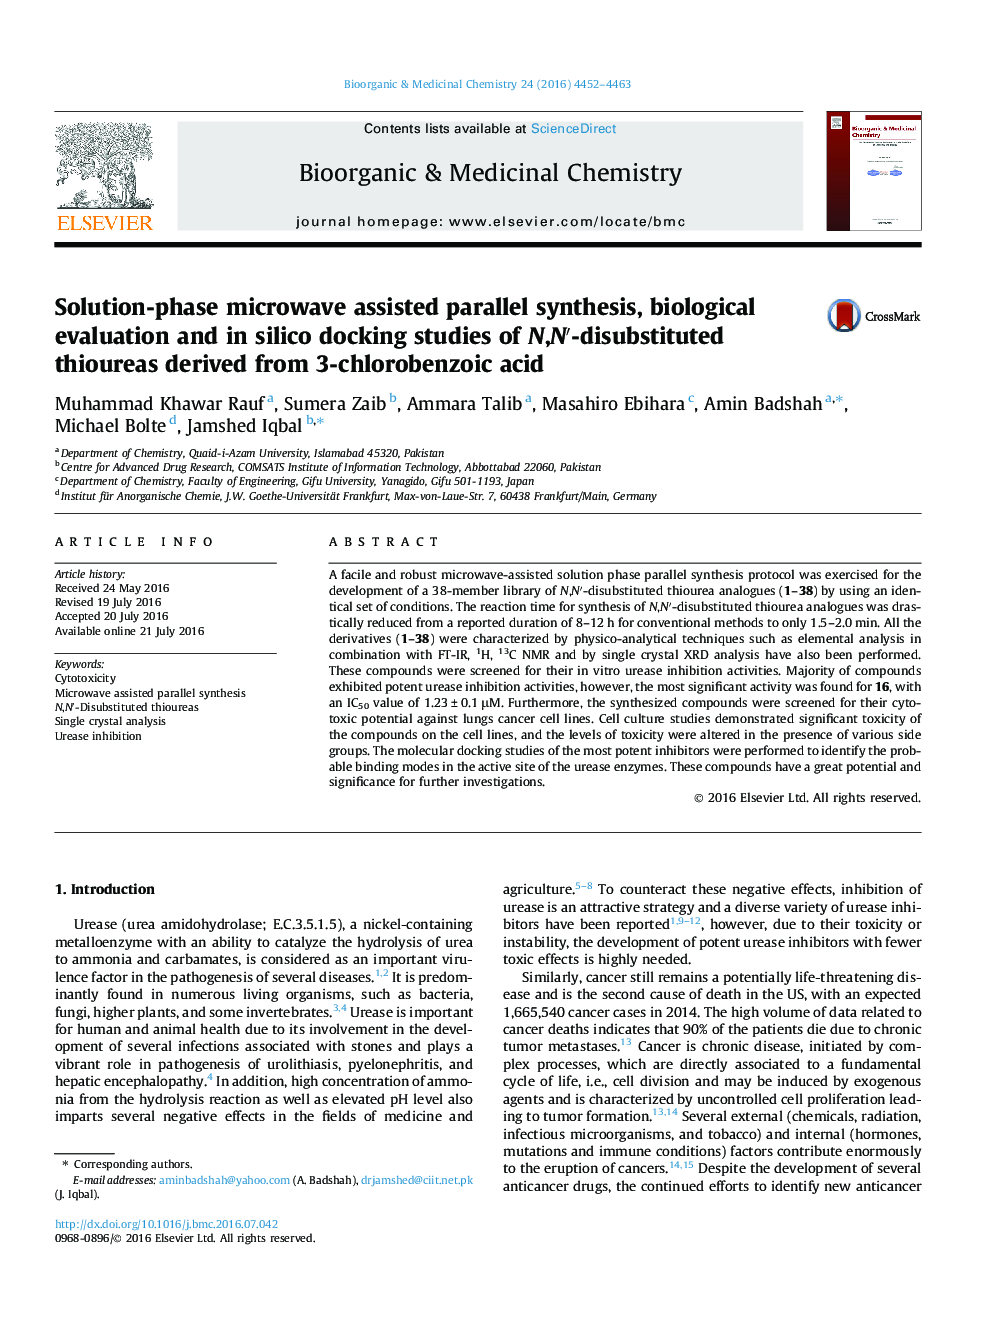 Solution-phase microwave assisted parallel synthesis, biological evaluation and in silico docking studies of N,N′-disubstituted thioureas derived from 3-chlorobenzoic acid